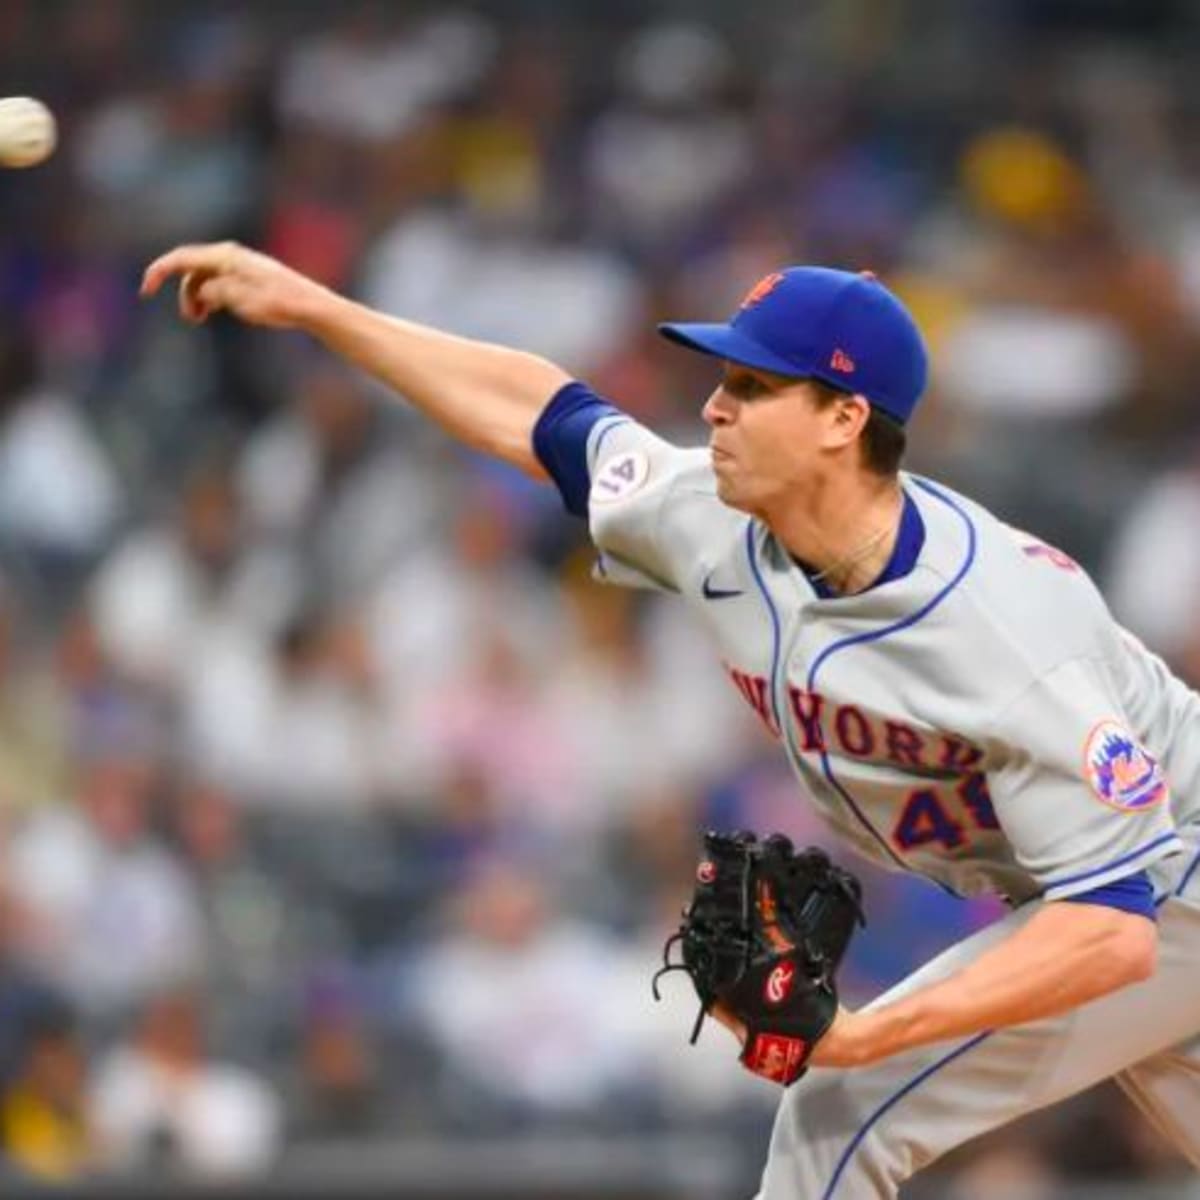 Jacob deGrom. Mets all star pitcher.